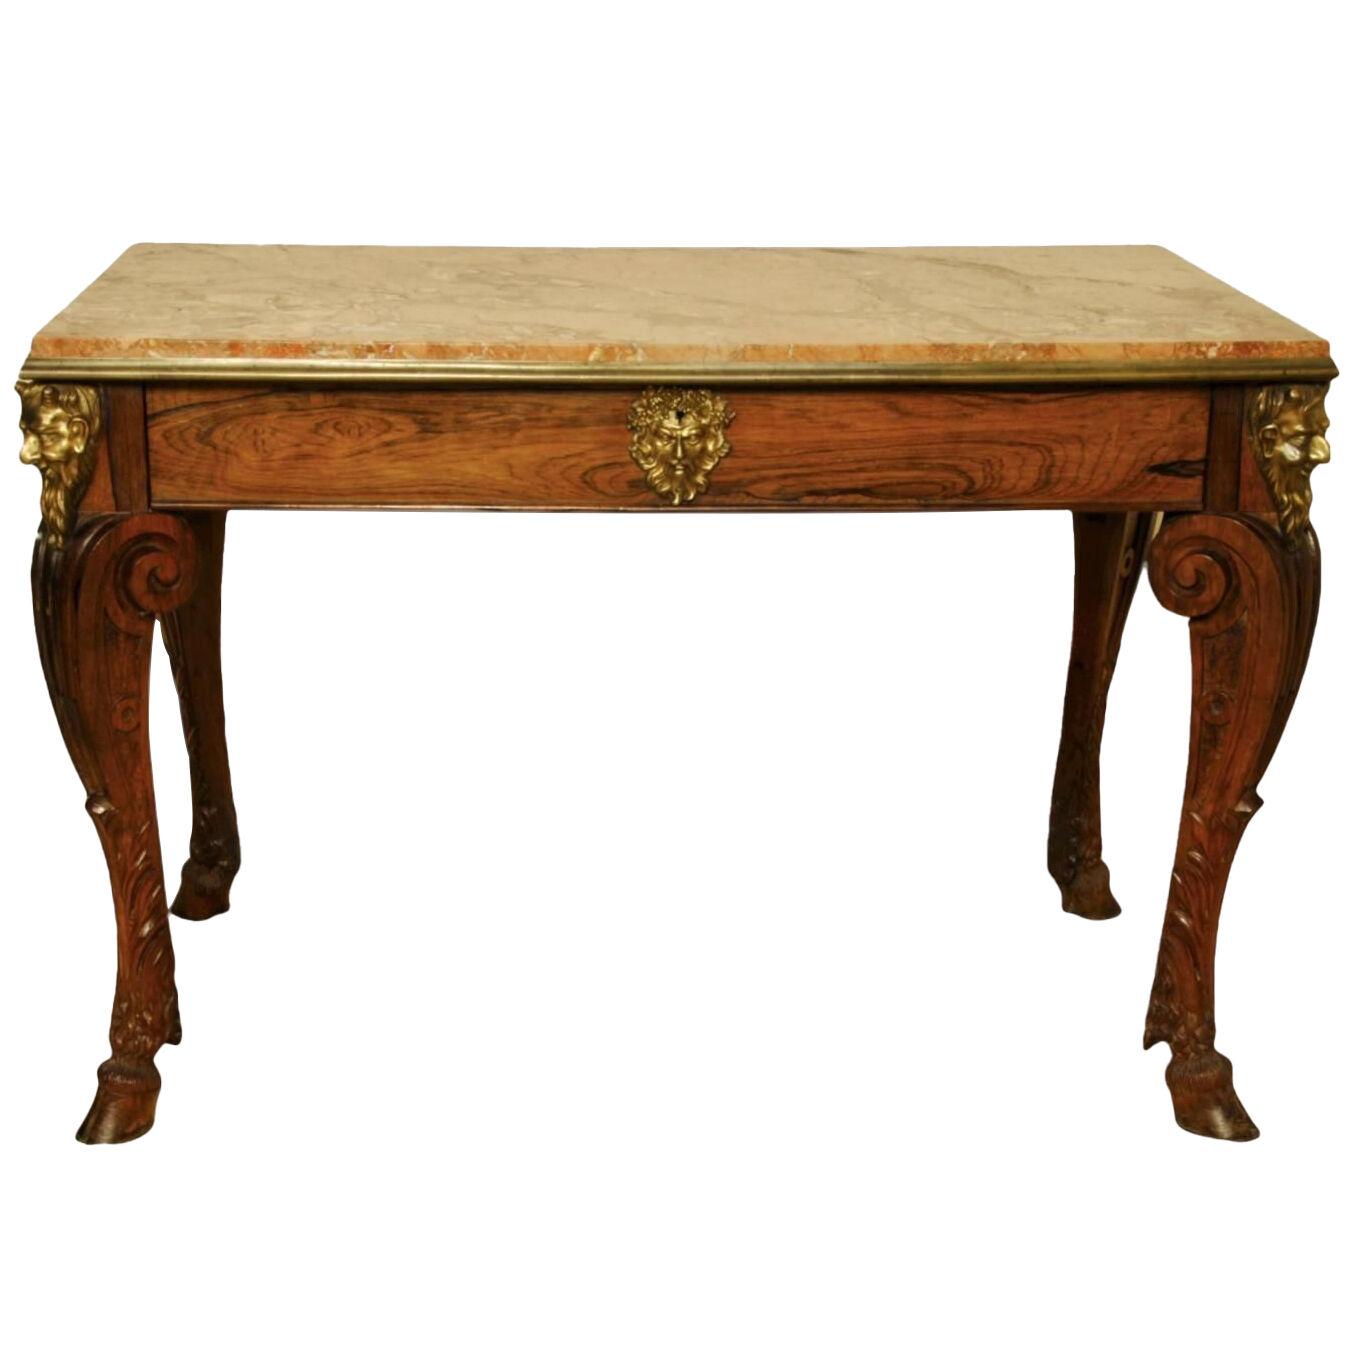 19TH CENTURY ROSEWOOD AND ORMOLU MOUNTED CENTRE TABLE